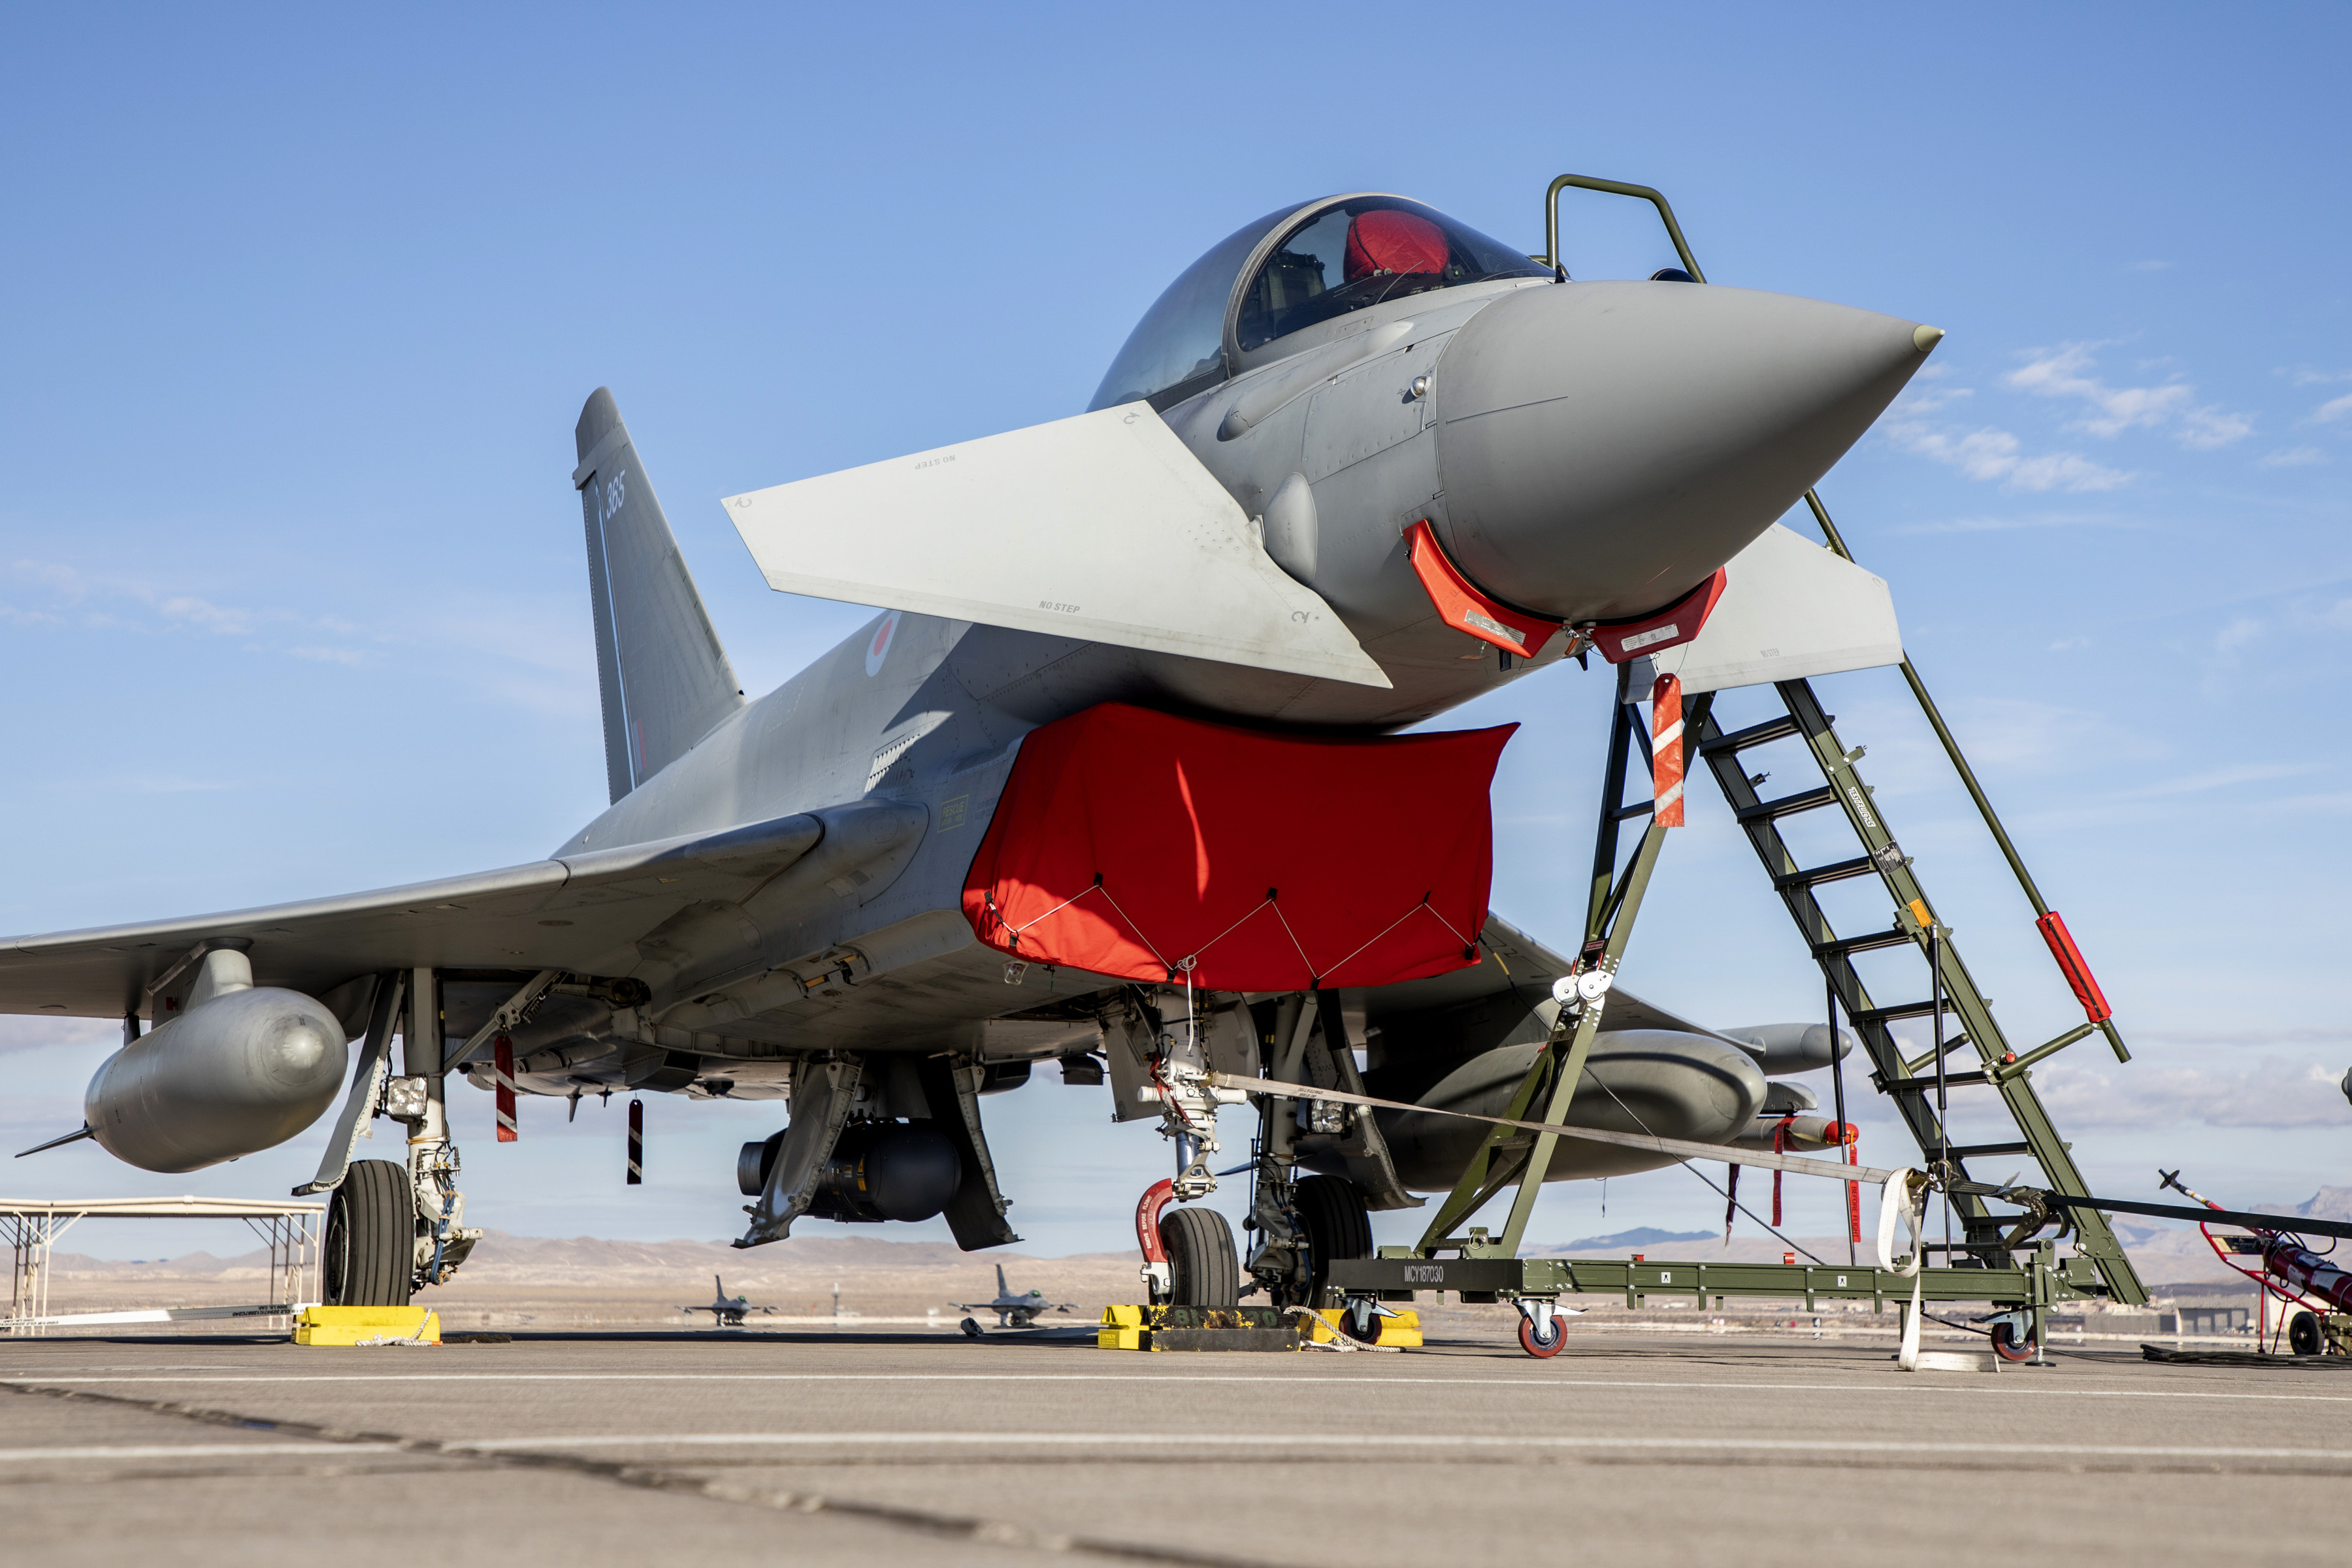 Typhoon on airfield with ladder to cockpit.